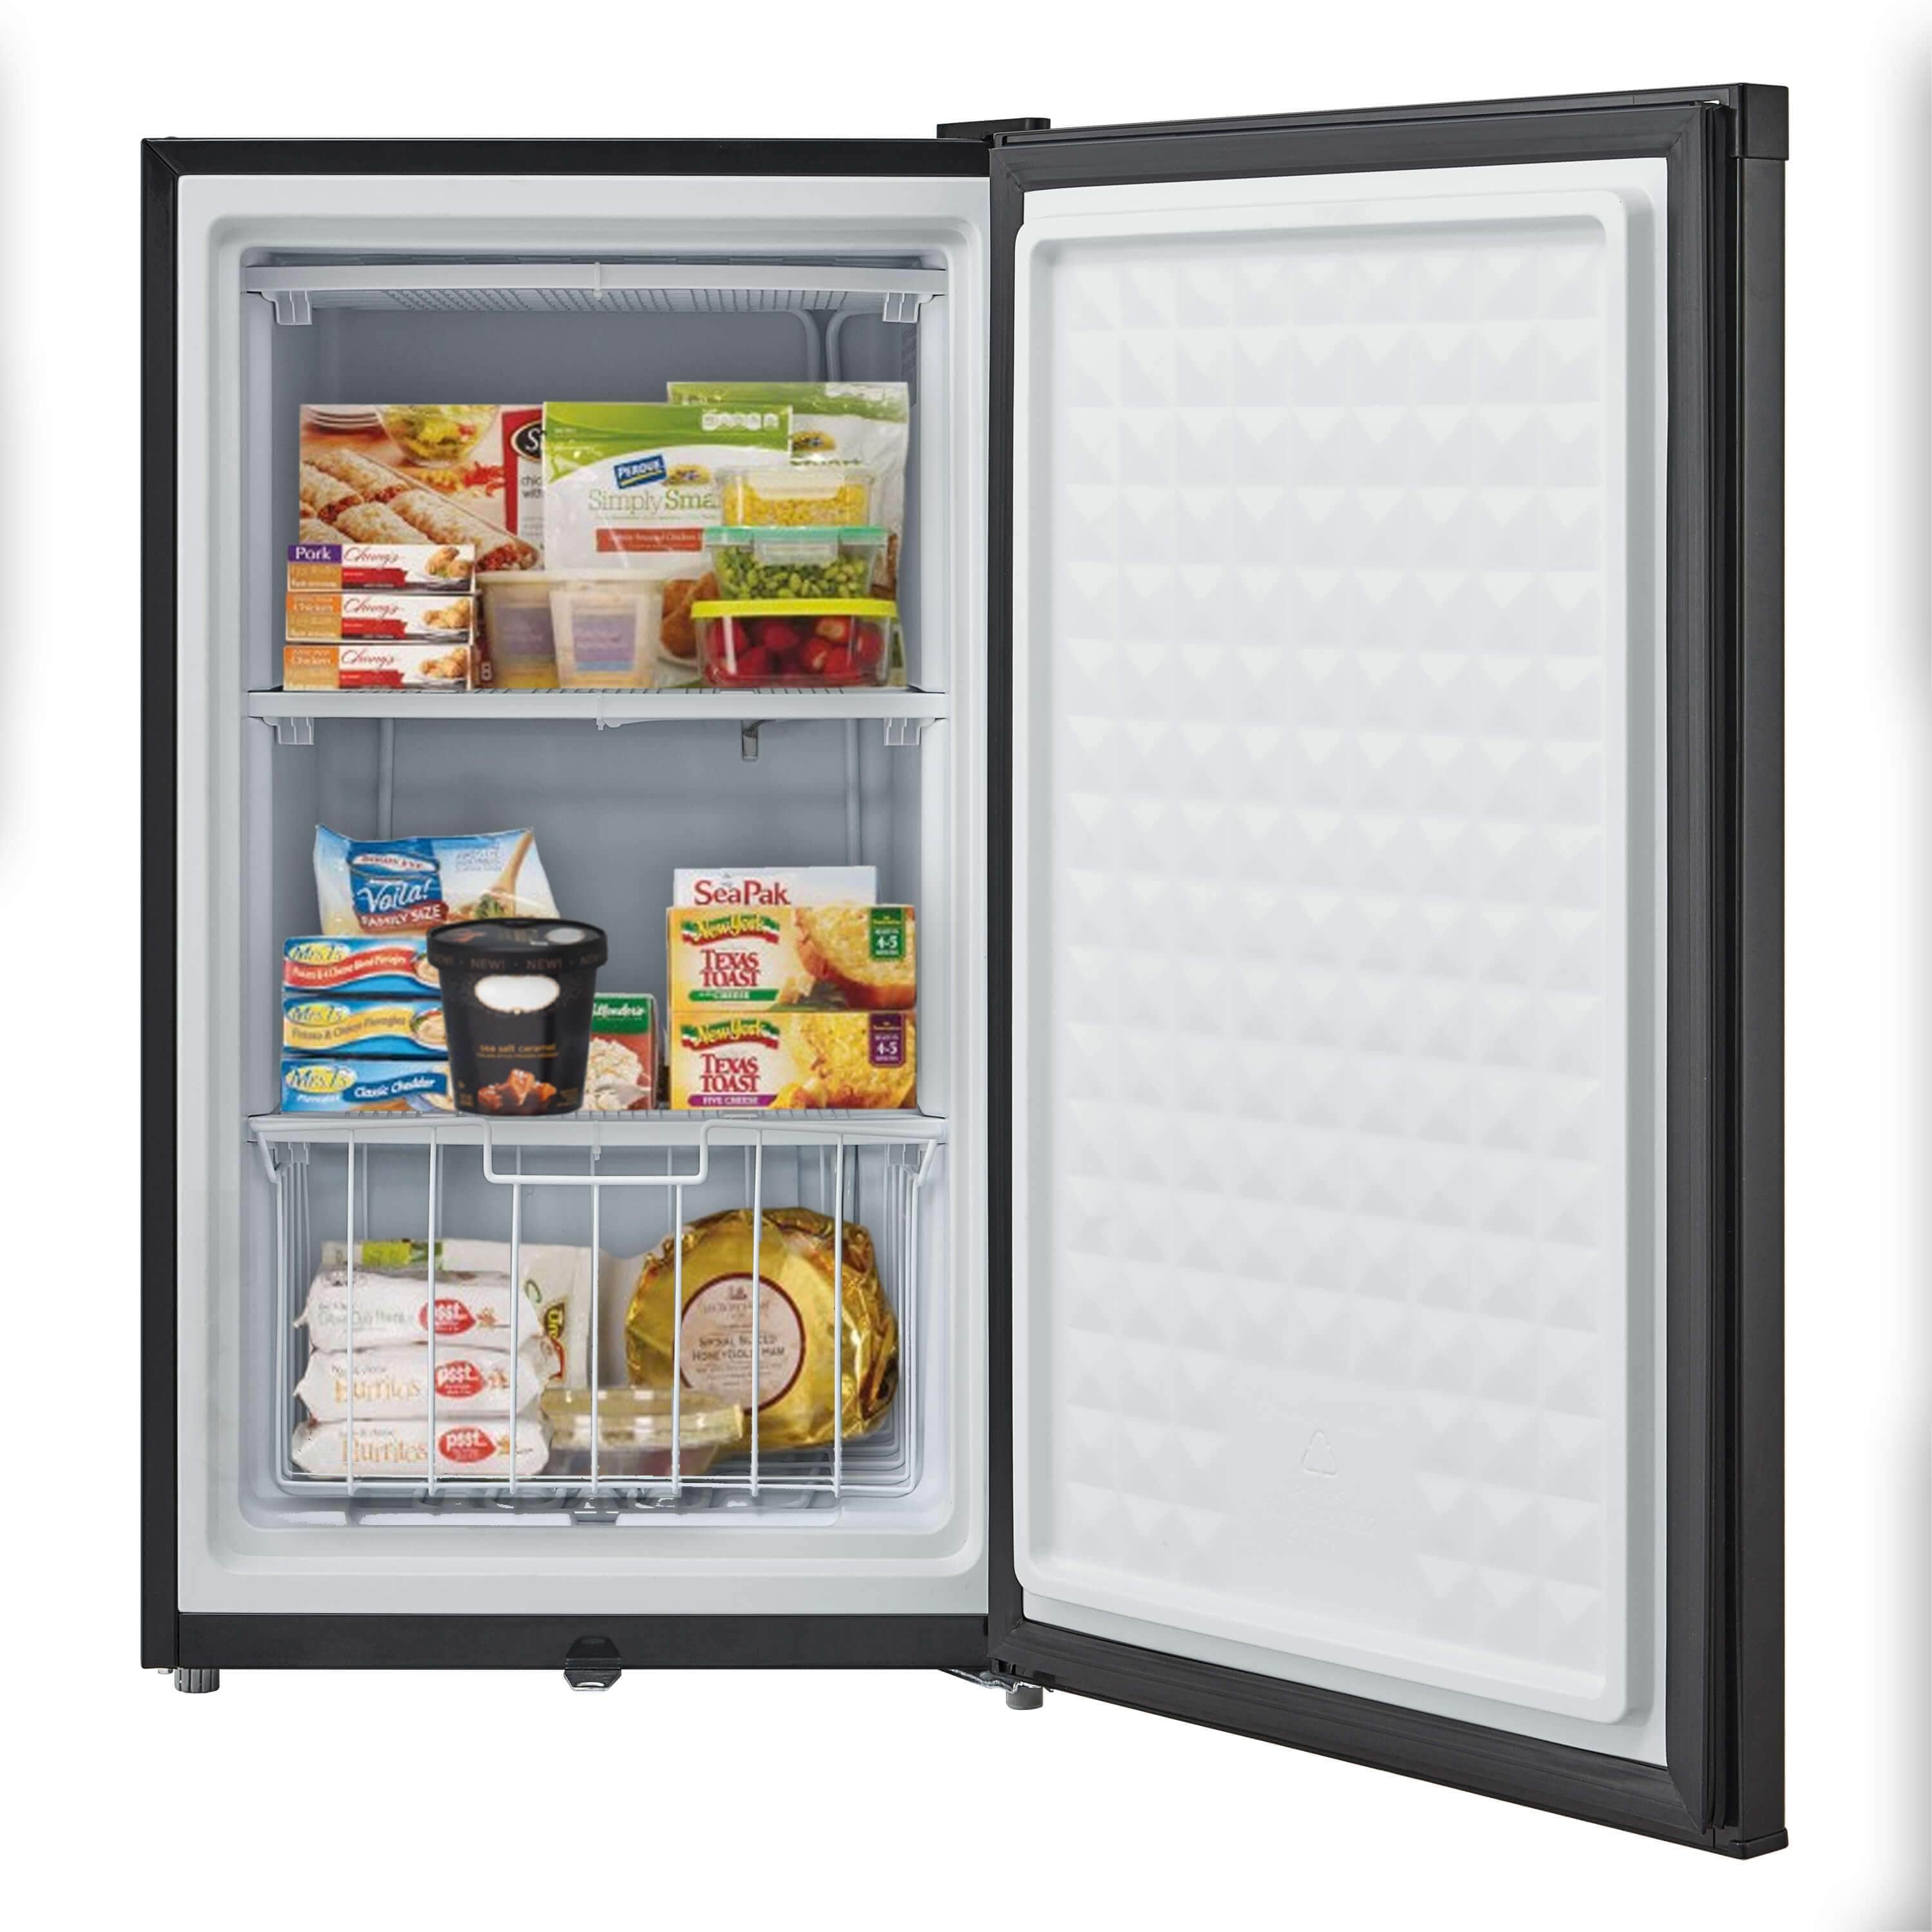 Whynter 3.0 cu.ft. Energy Star Stainless Steel Upright Freezer with Lock CUF-301SS Freezers CUF-301SS Luxury Appliances Direct